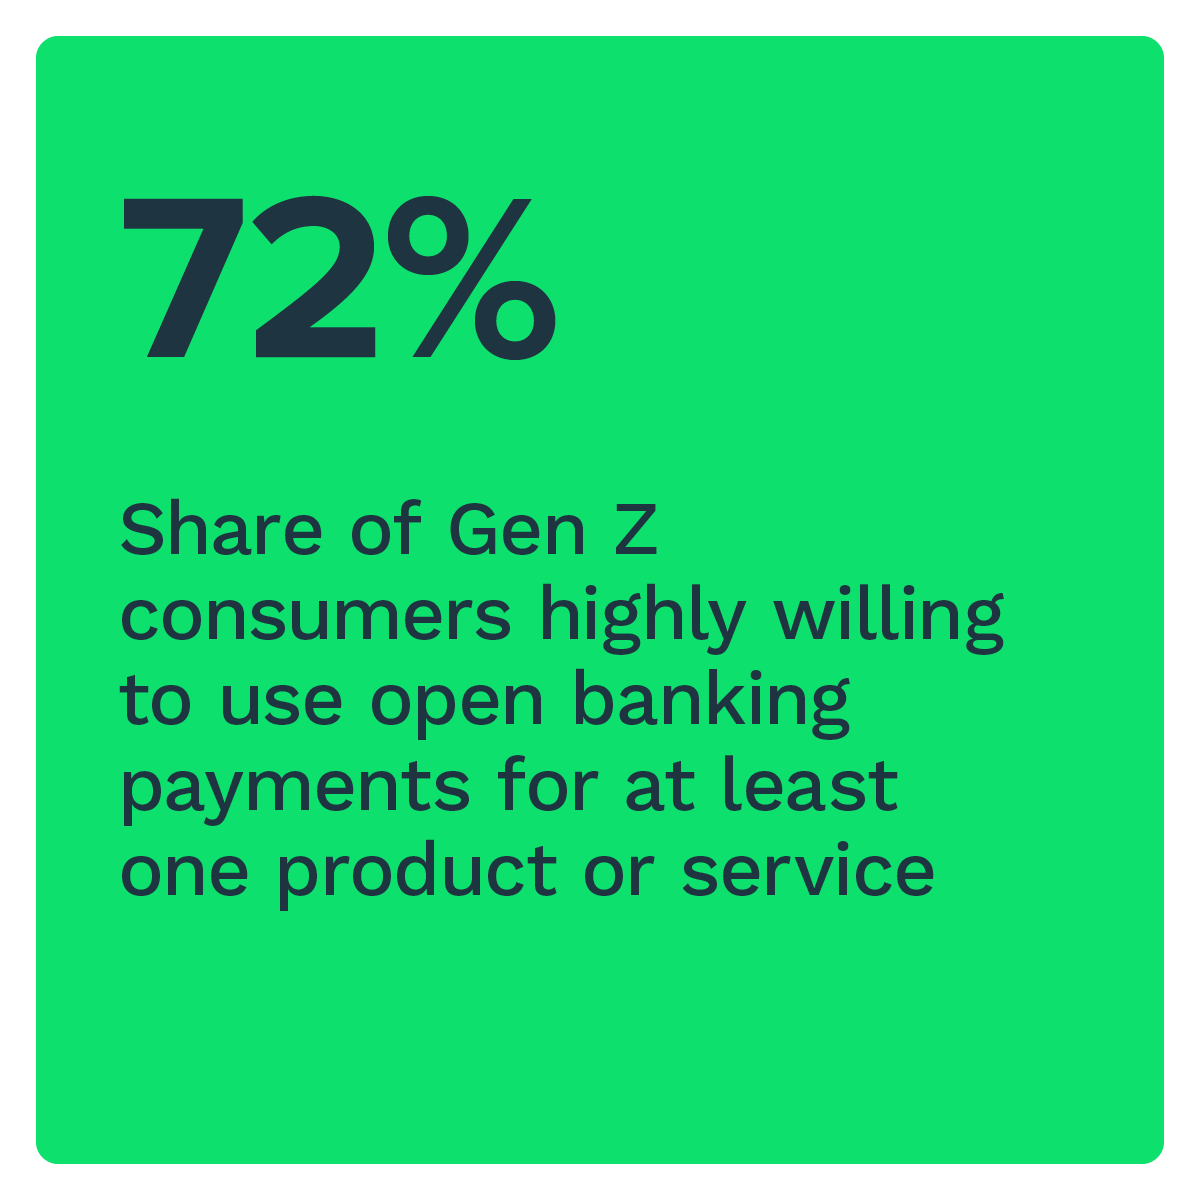 72%: Share of Gen Z consumers highly willing to use open banking payments for at least one product or service